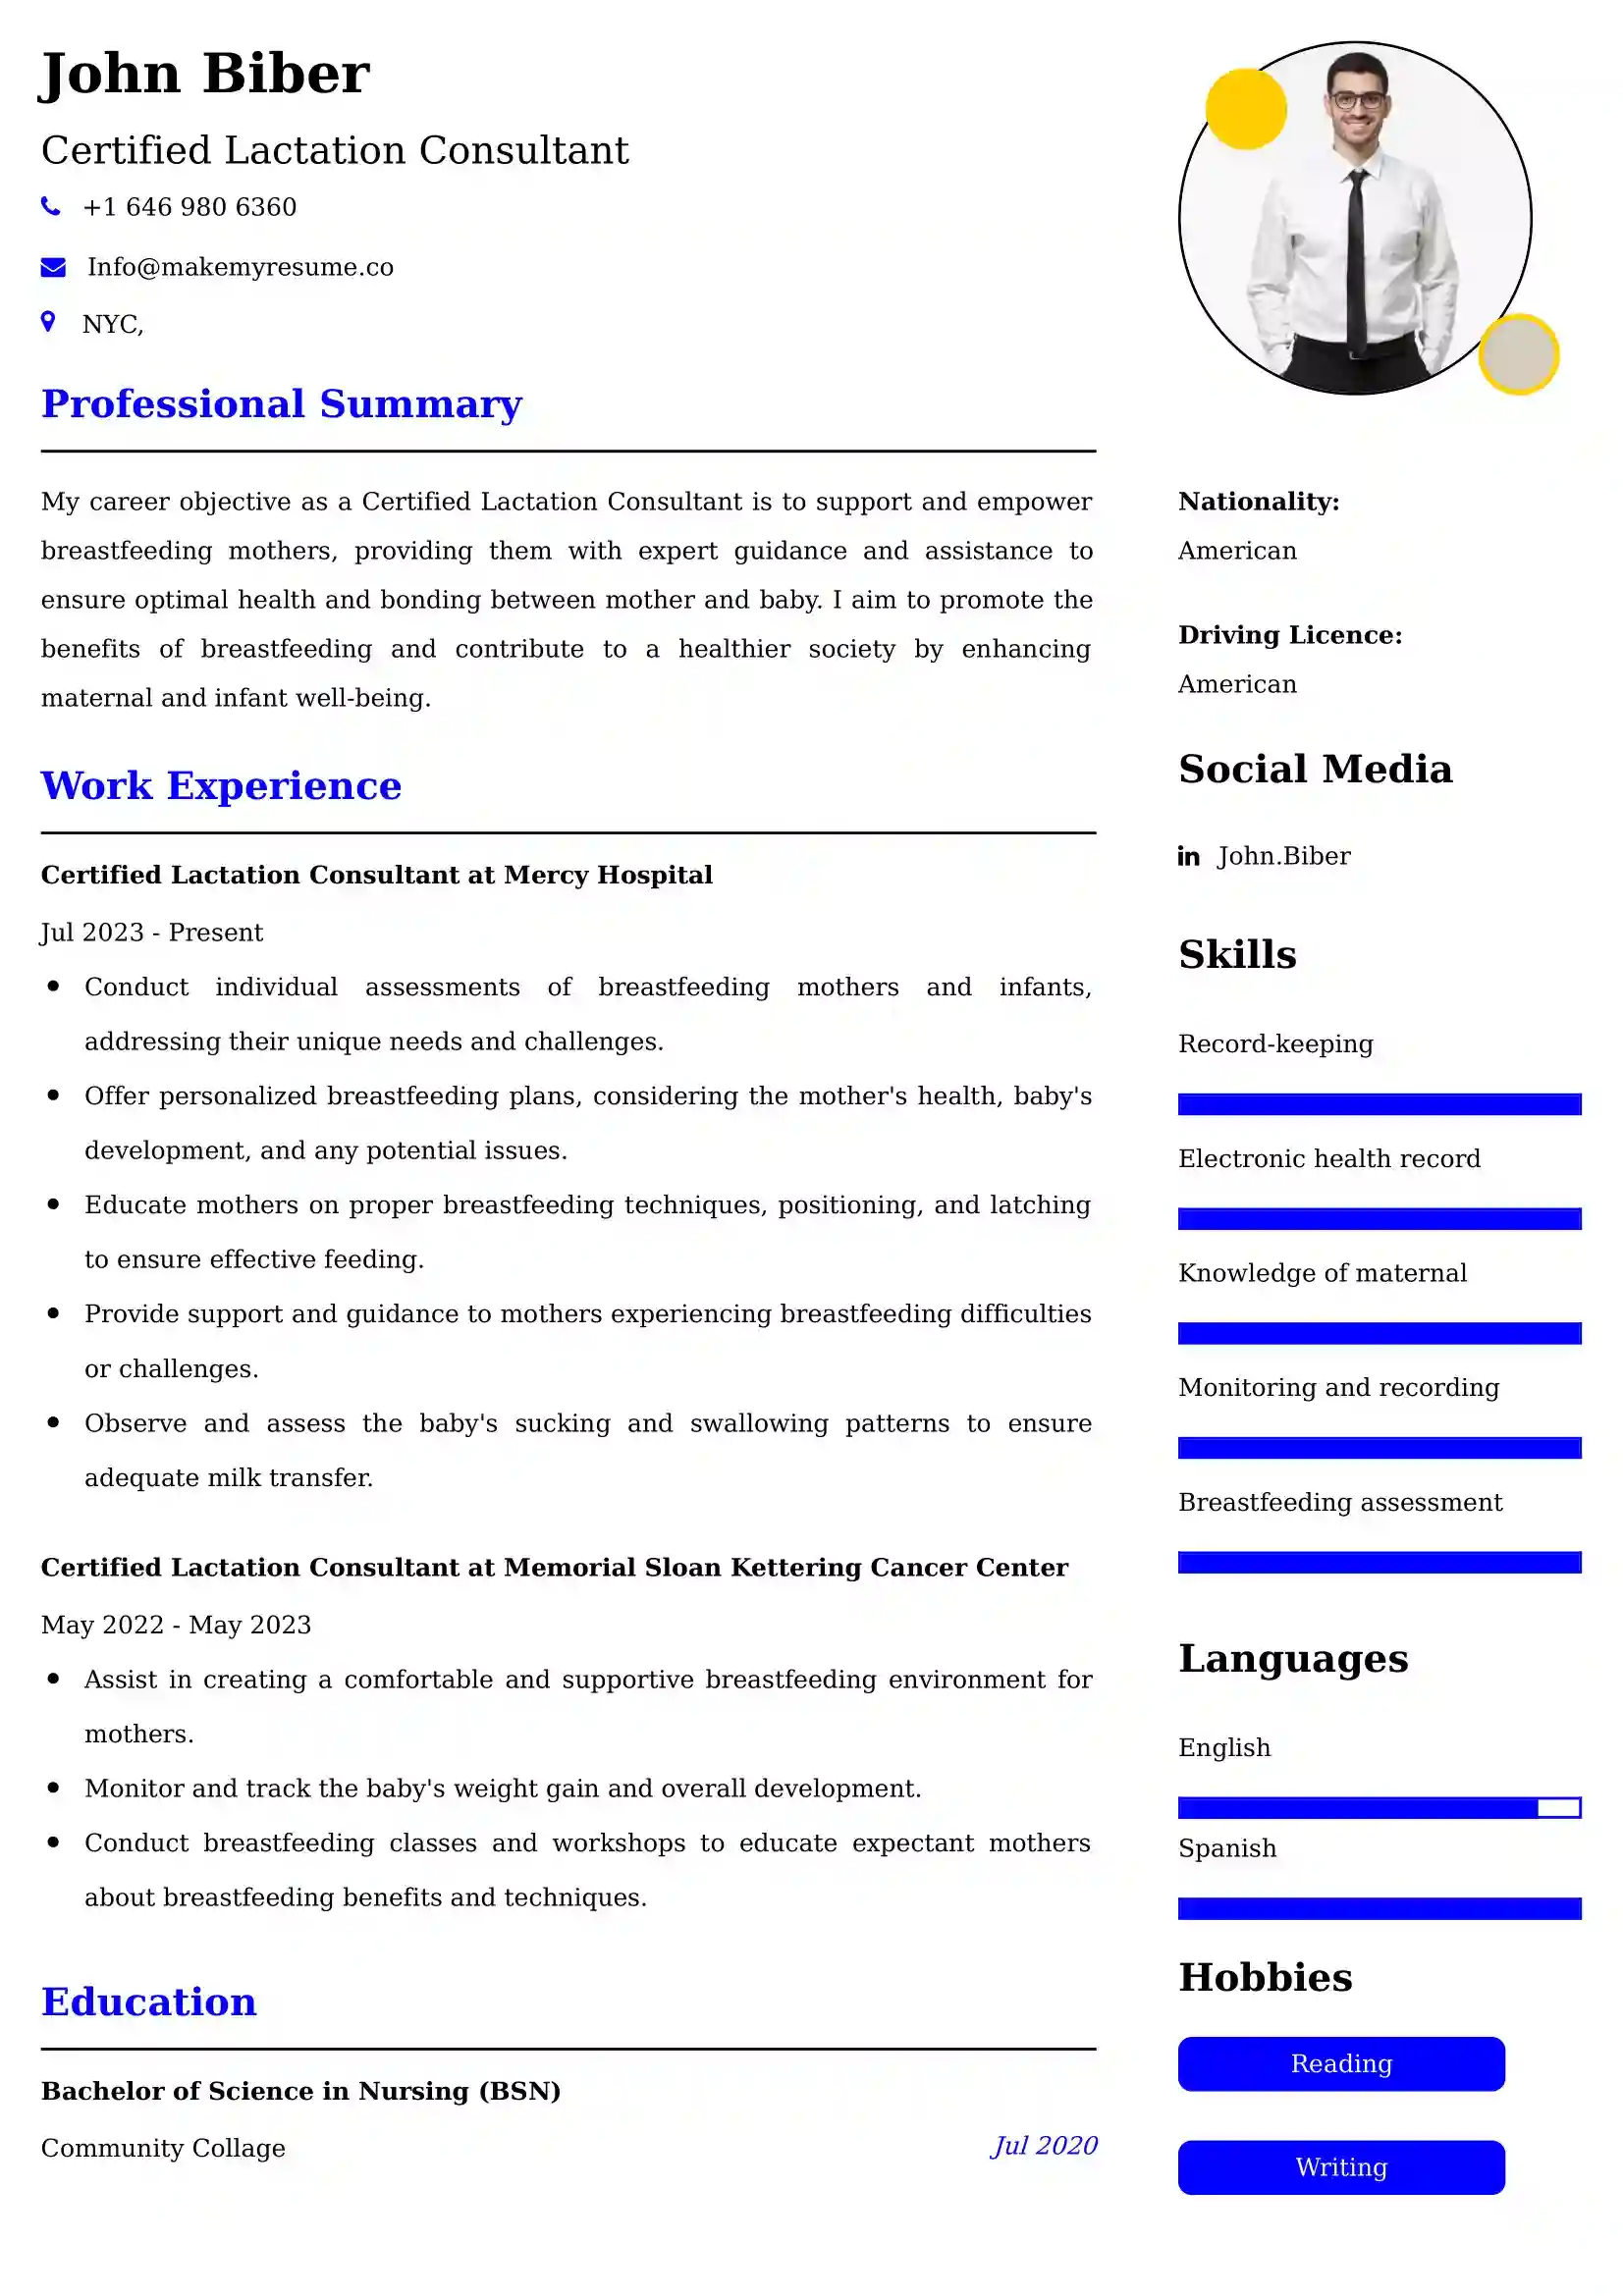 Certified Lactation Consultant Resume Examples - UK Format, Latest Template.